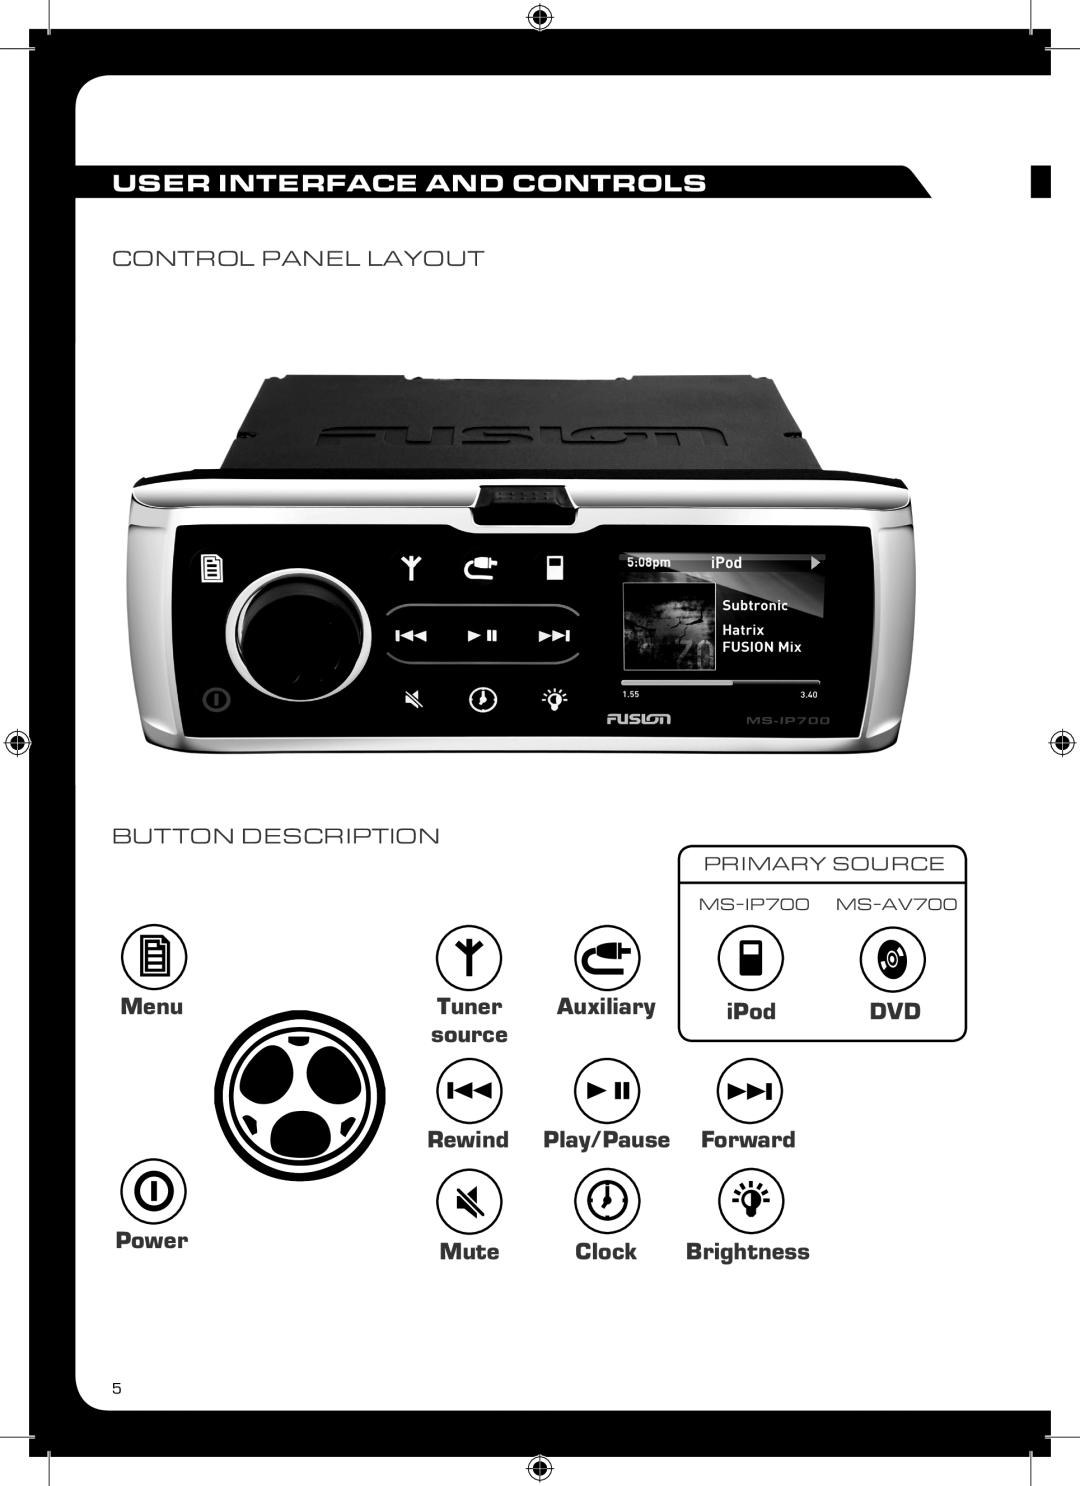 Fusion MS-IP700 User Interface And Controls, Menu, Tuner, Auxiliary, iPod, source, Play/Pause, Forward, Power, Mute, Clock 